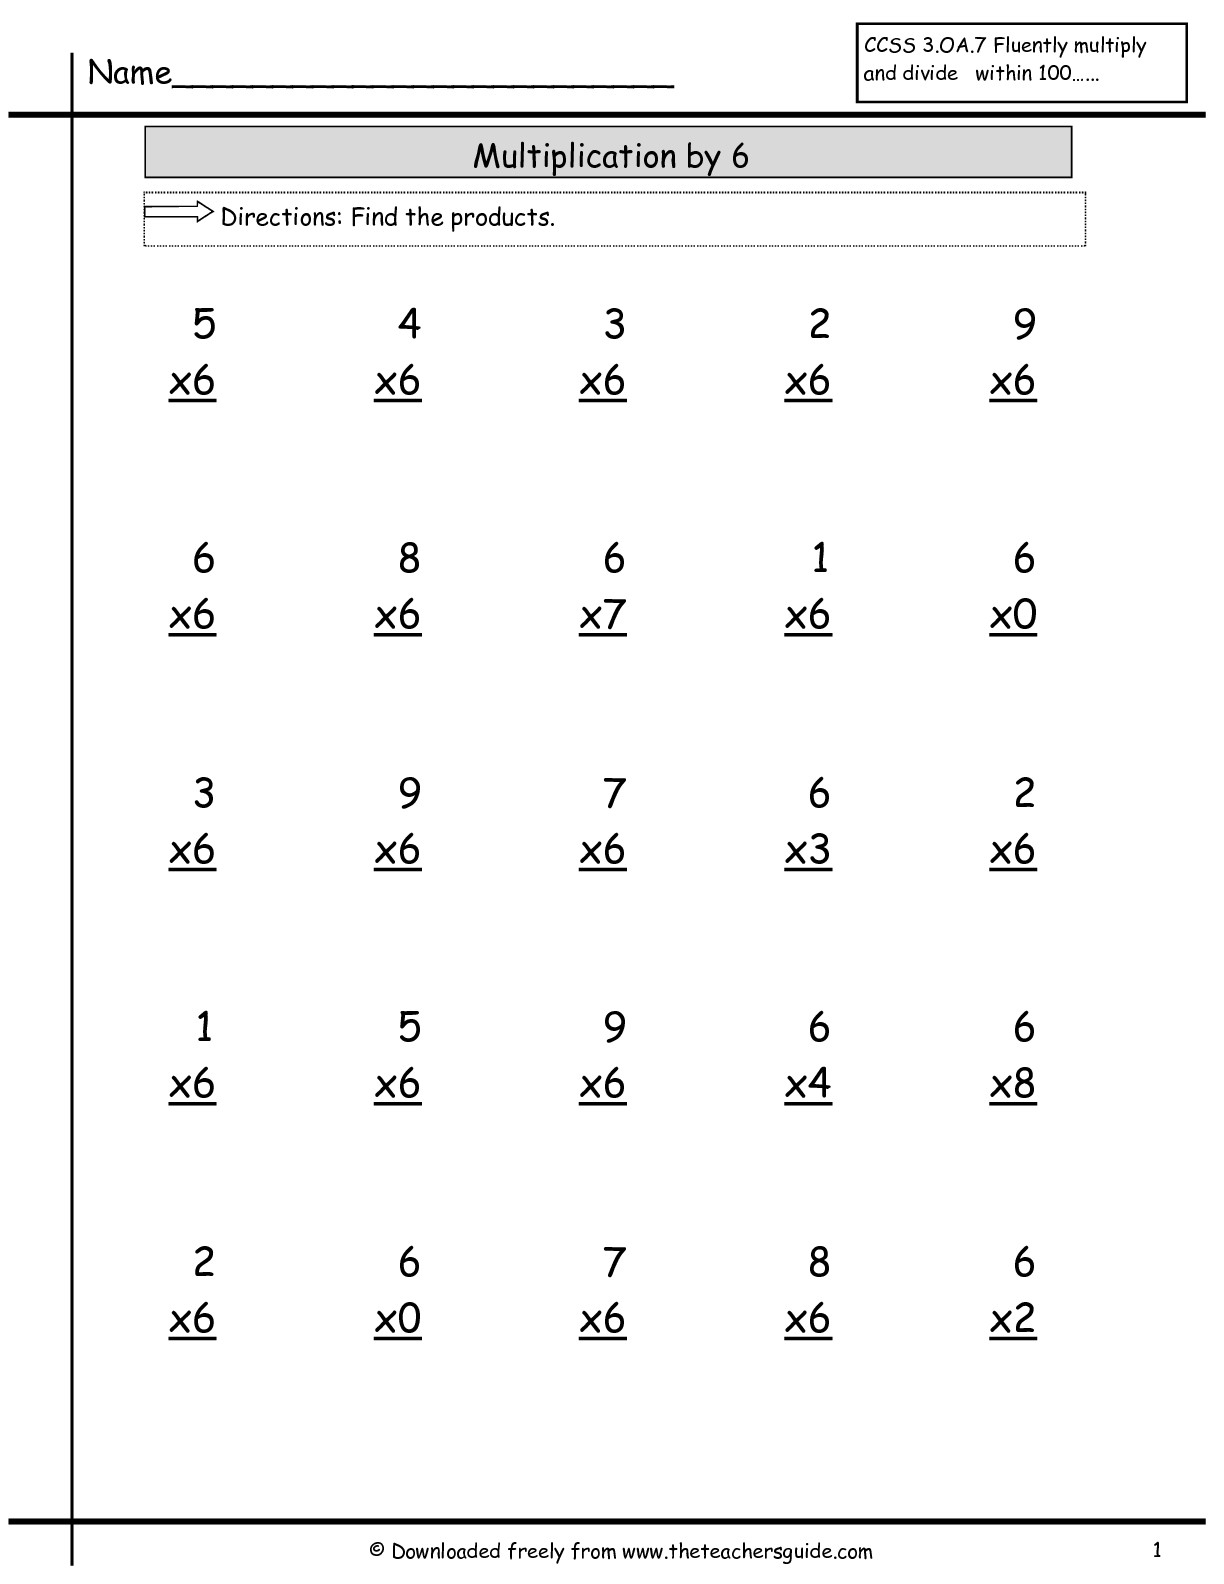 Multiplication Facts Worksheets From The Teacher's Guide regarding Multiplication Worksheets 6S And 7S